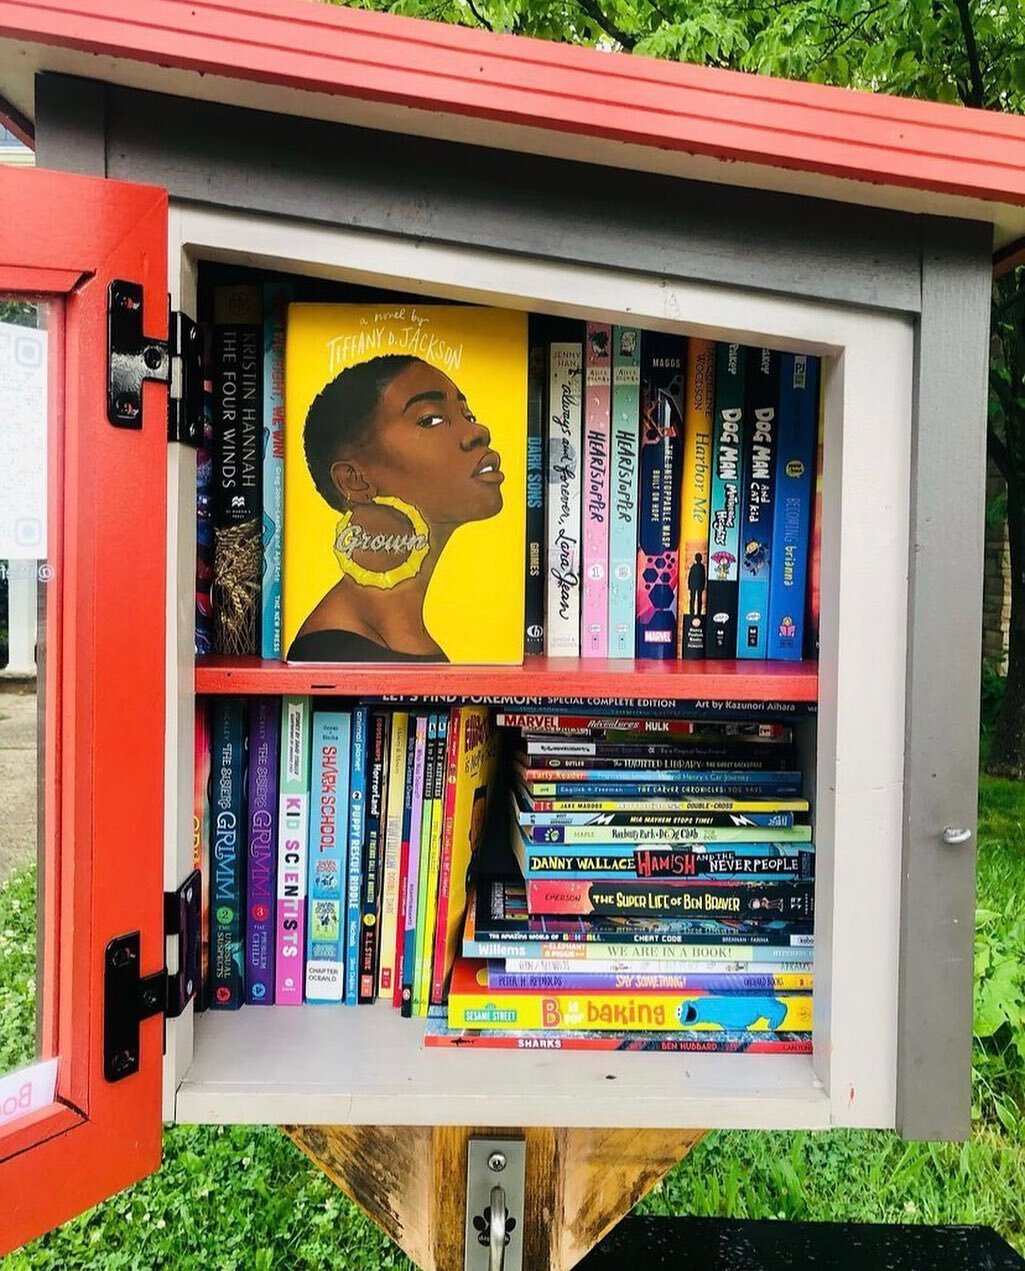 The incredible @littlefreediverselibrariesmtc is on a mission to add inclusive and diverse literature to LFLs across Montclair, NJ &amp; beyond. So amazed by all that you are doing on top of managing and running your own LFDL. 🙌🏾 let&rsquo;s keep a